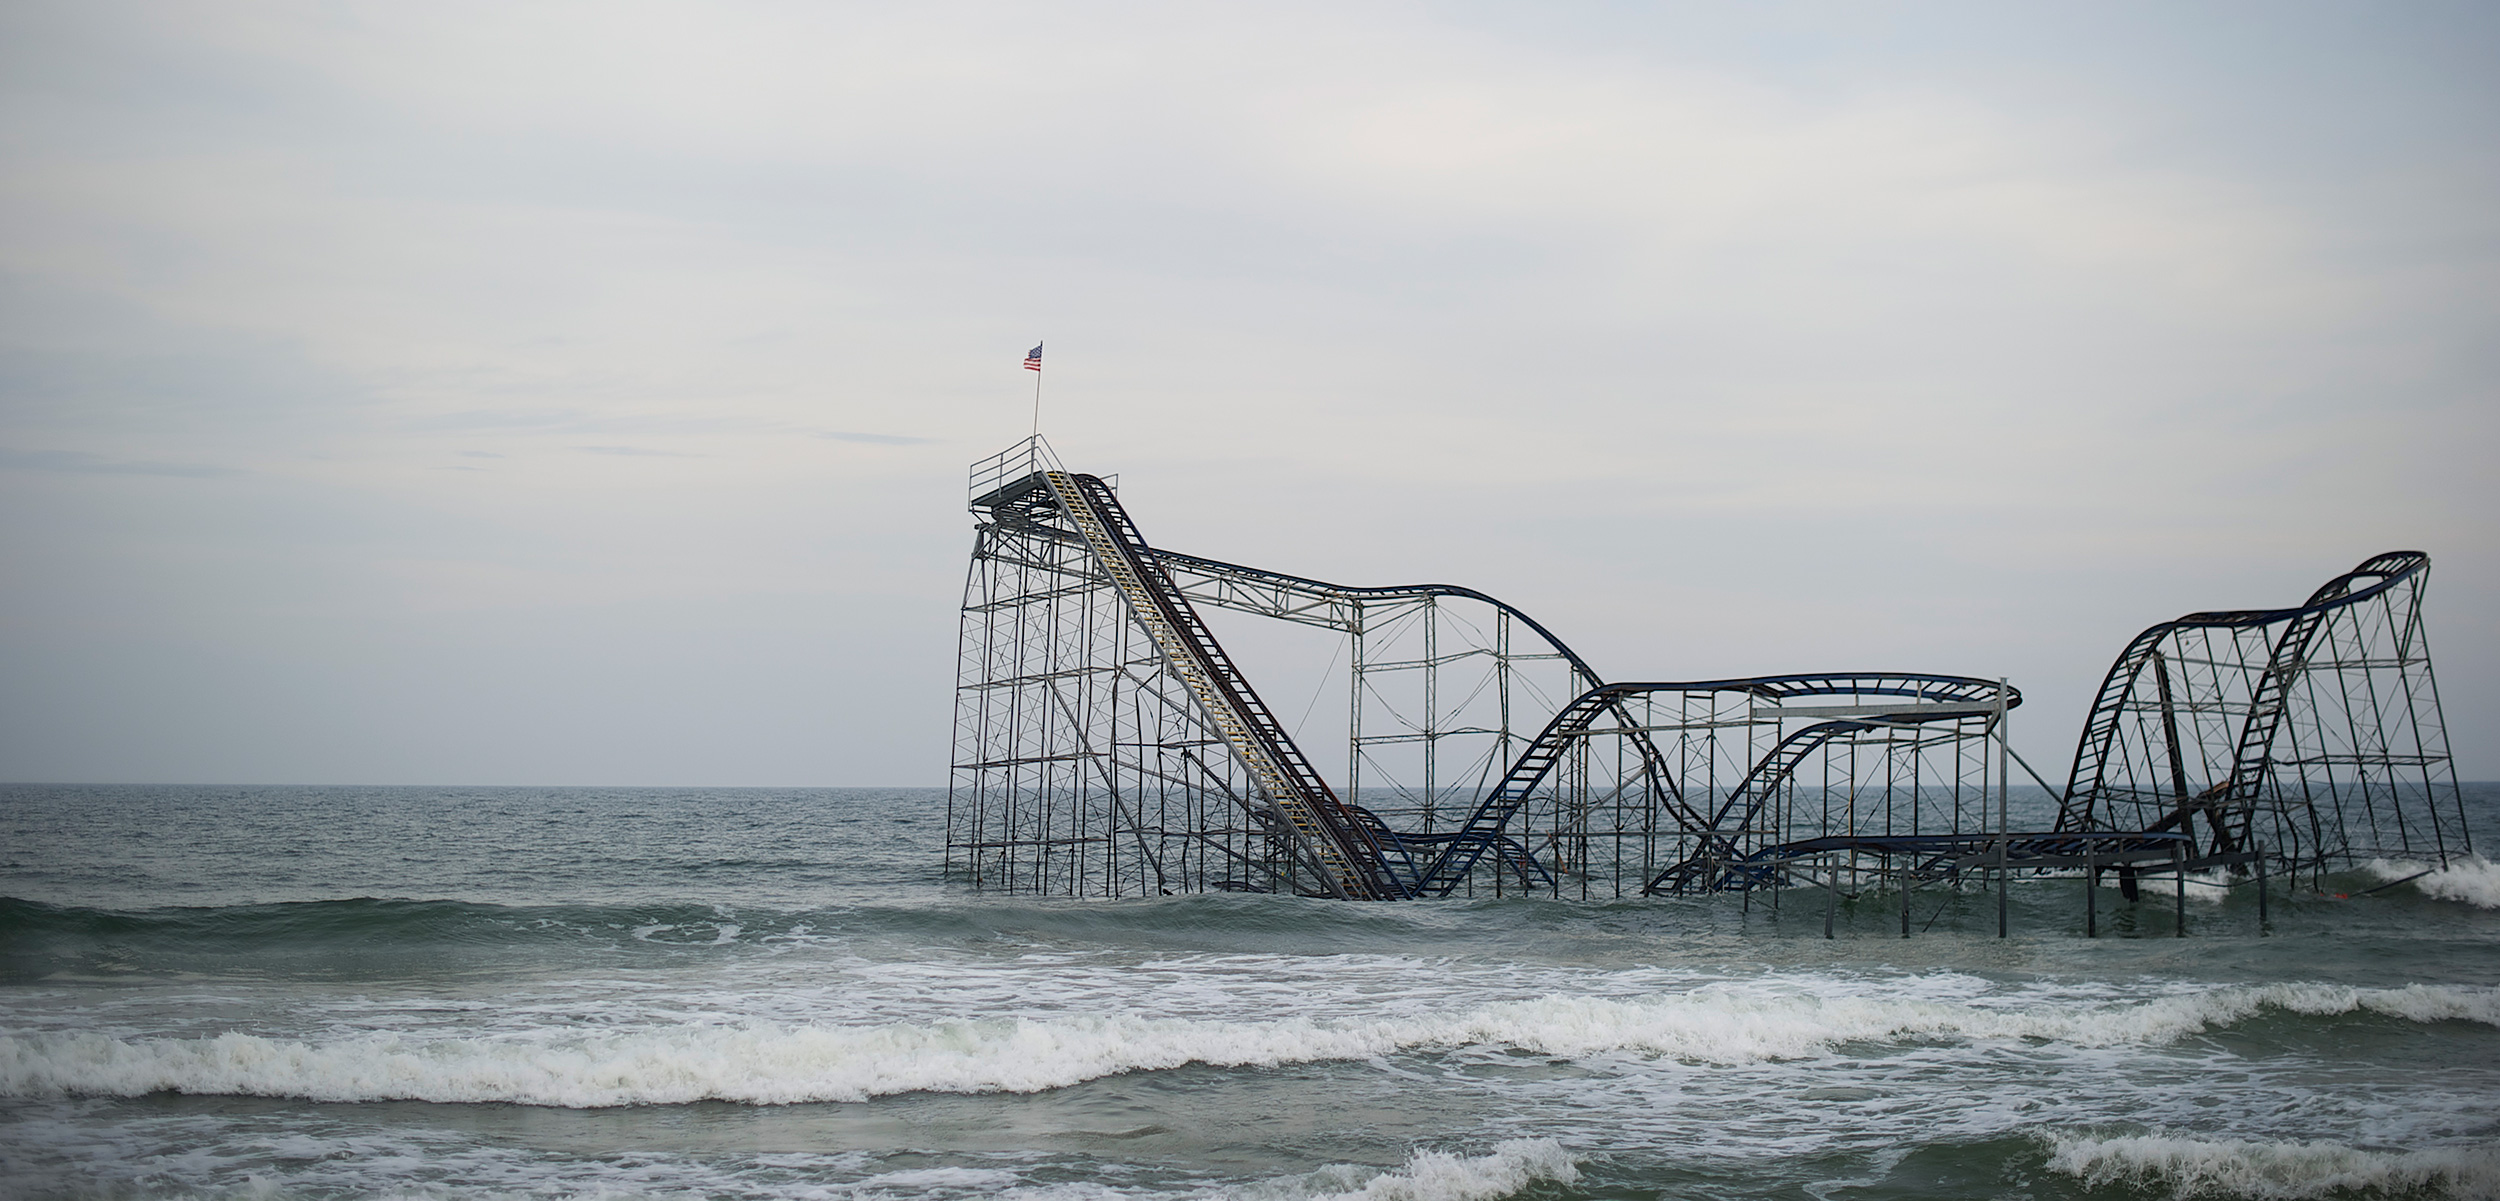 In 2012, Superstorm Sandy hit the New Jersey coastline, smashing homes, businesses, the boardwalk—and Seaside Heights’ iconic roller coaster, an enduring symbol of the storm’s ferocity. Photo by Mark Makela/Corbis